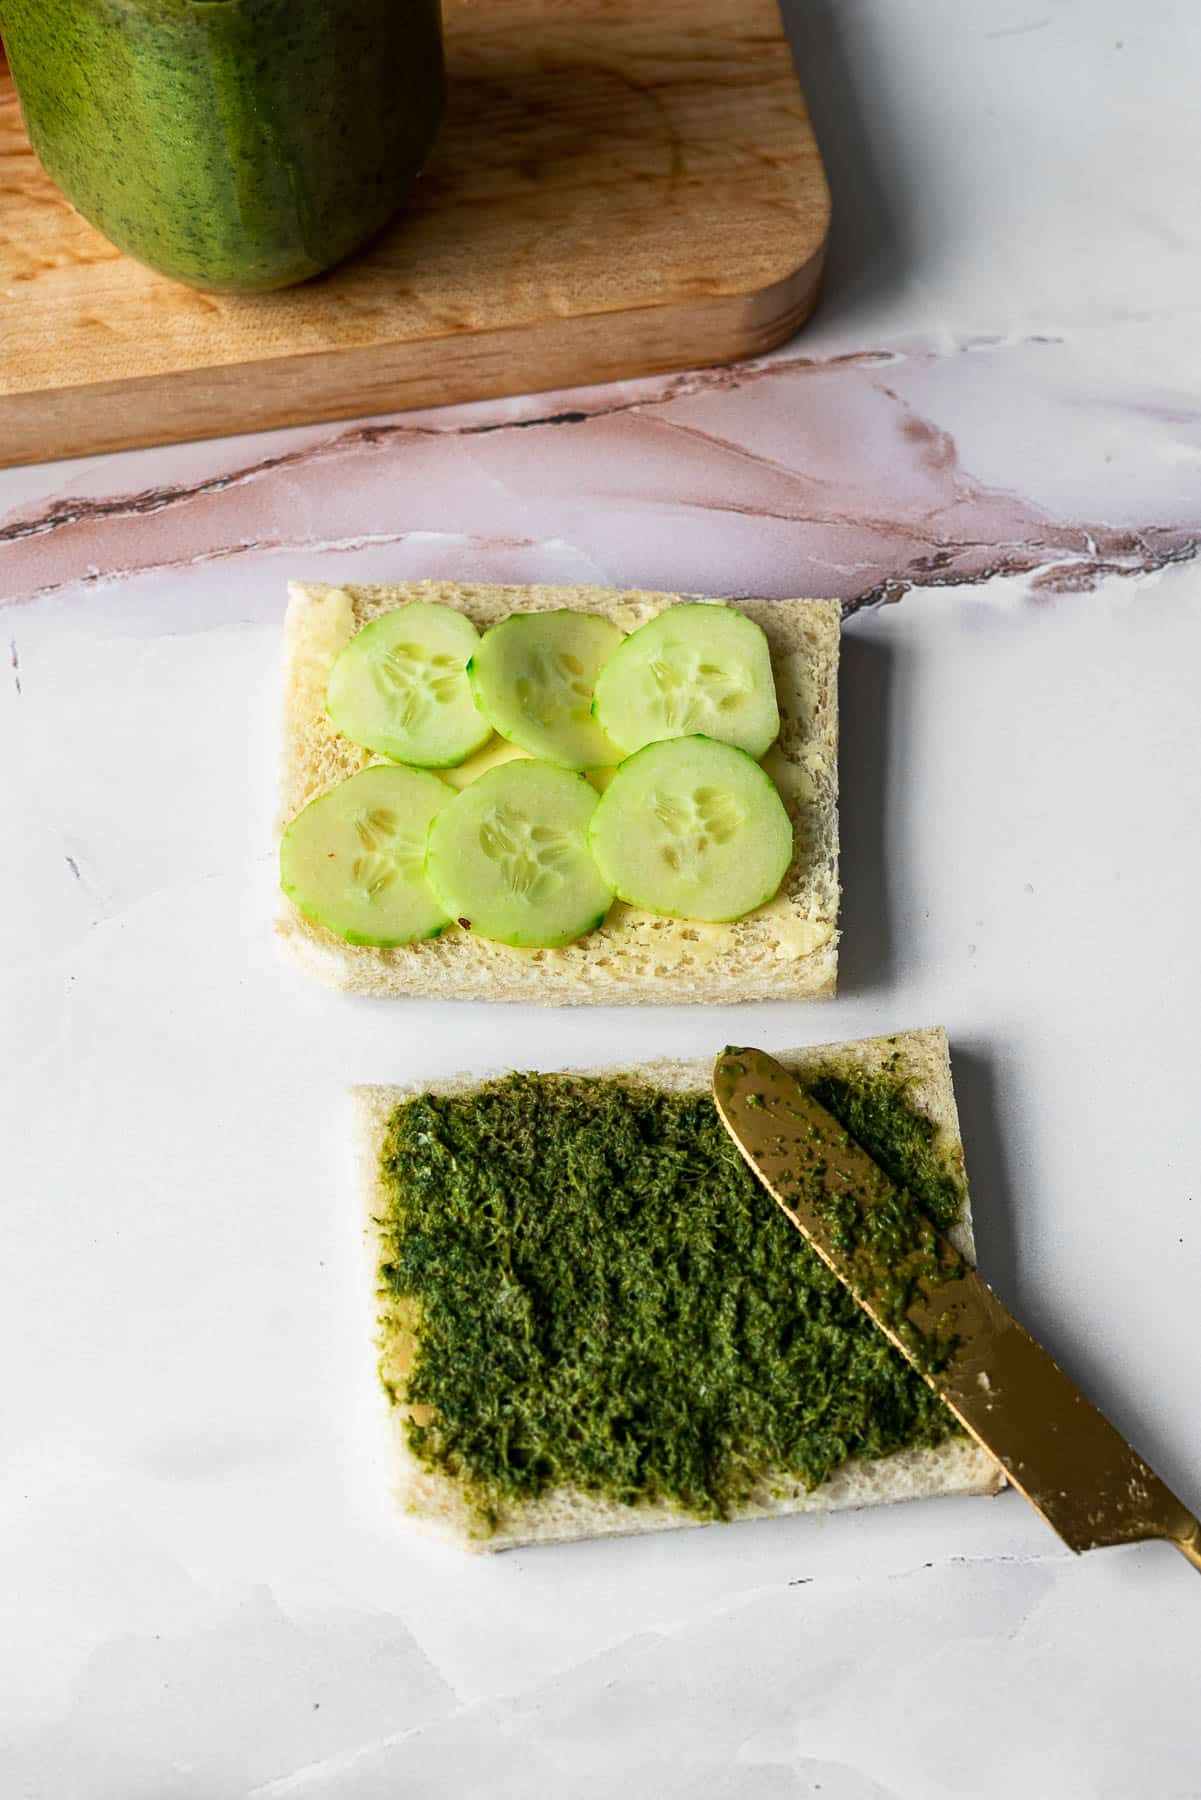 Crustless White bread with slices of cucumber on one and mint-cilantro chutney on the other with a golden knife resting on the chutney slice